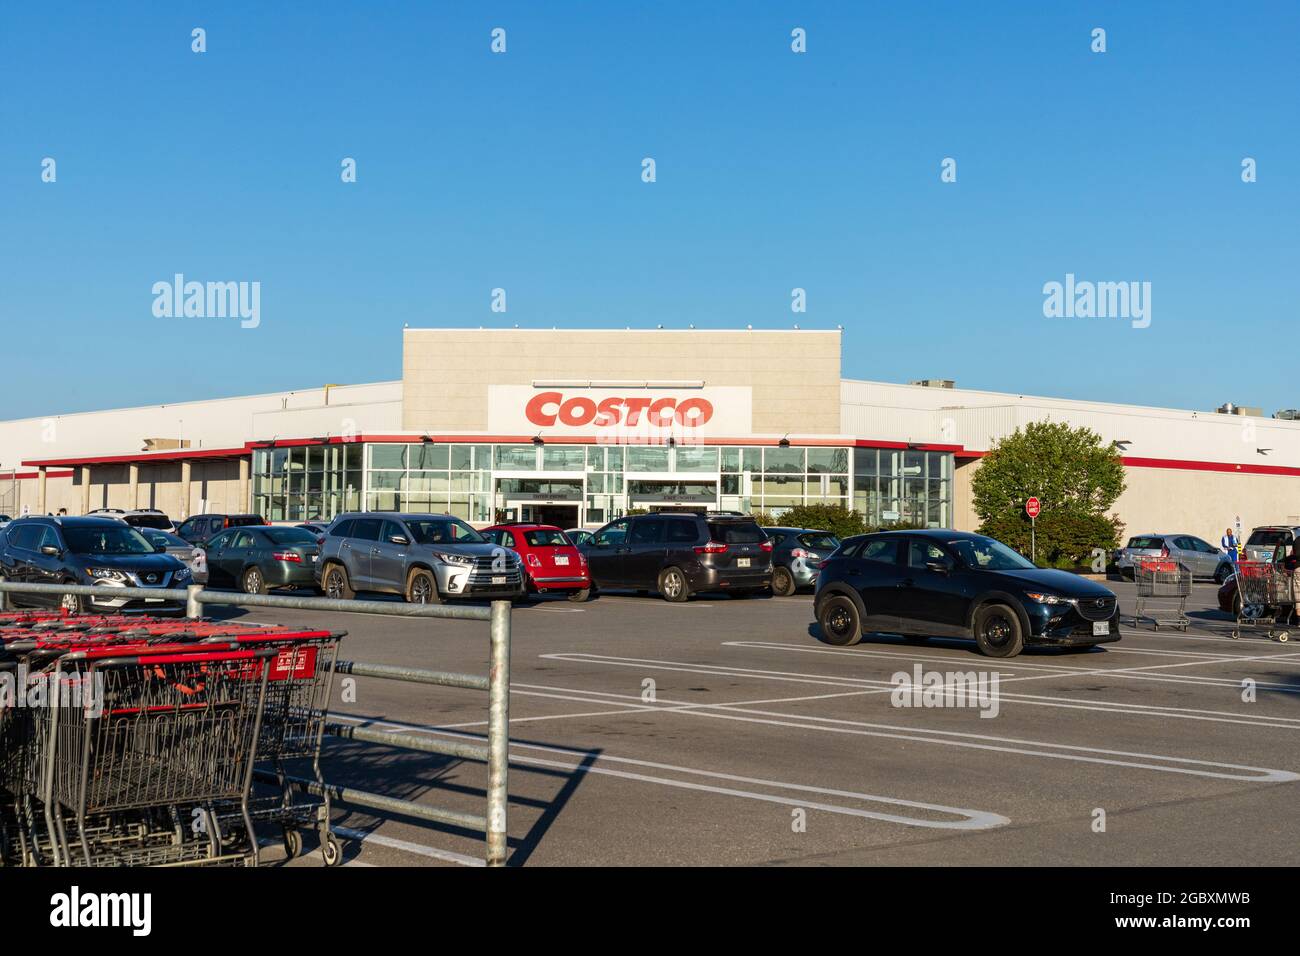 Ottawa, Canada - August 2, 2021: Costco Wholesale warehouse storefront and parking lot in Ottawa, Canada. Stock Photo